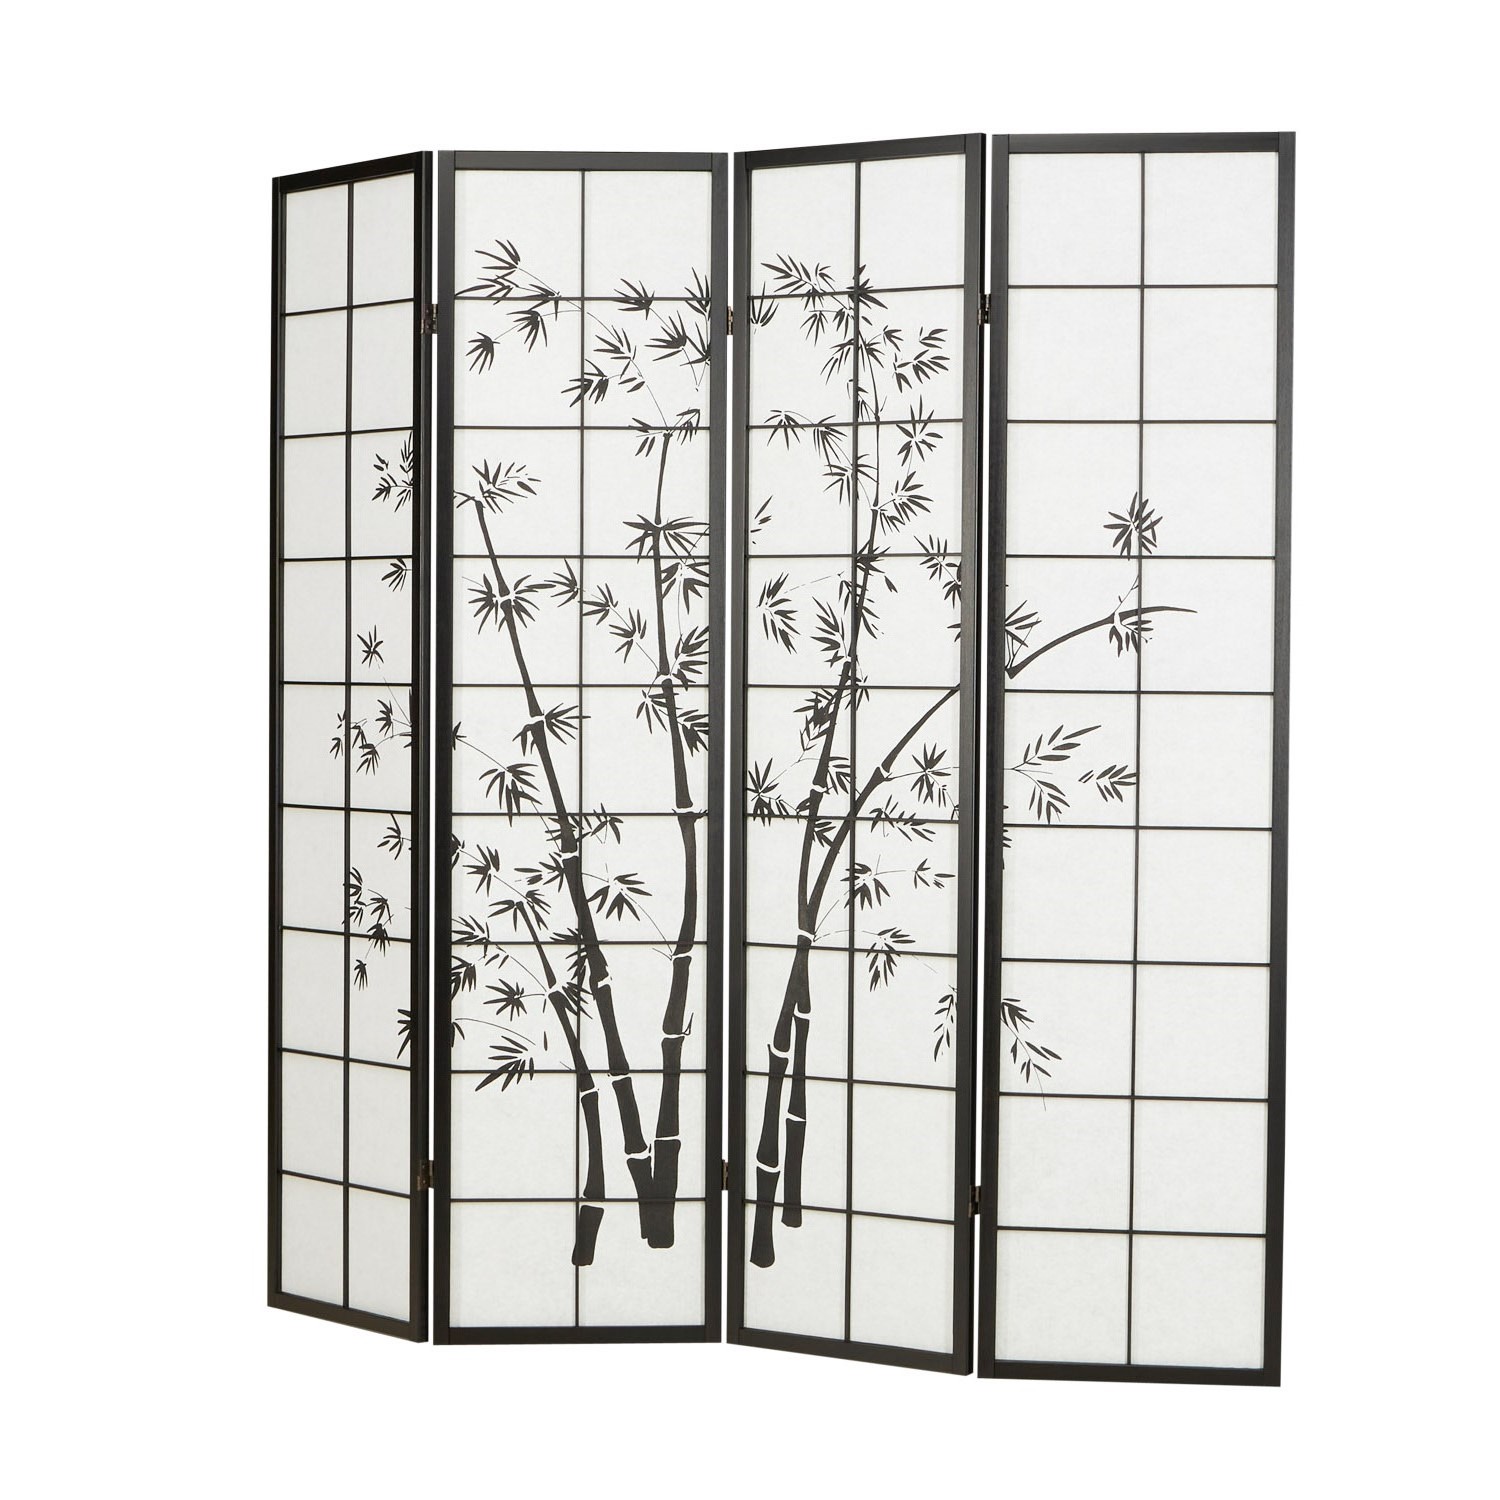 Paravent room divider 4 parts, wood black, rice paper white, bamboo pattern, height 179 cm	